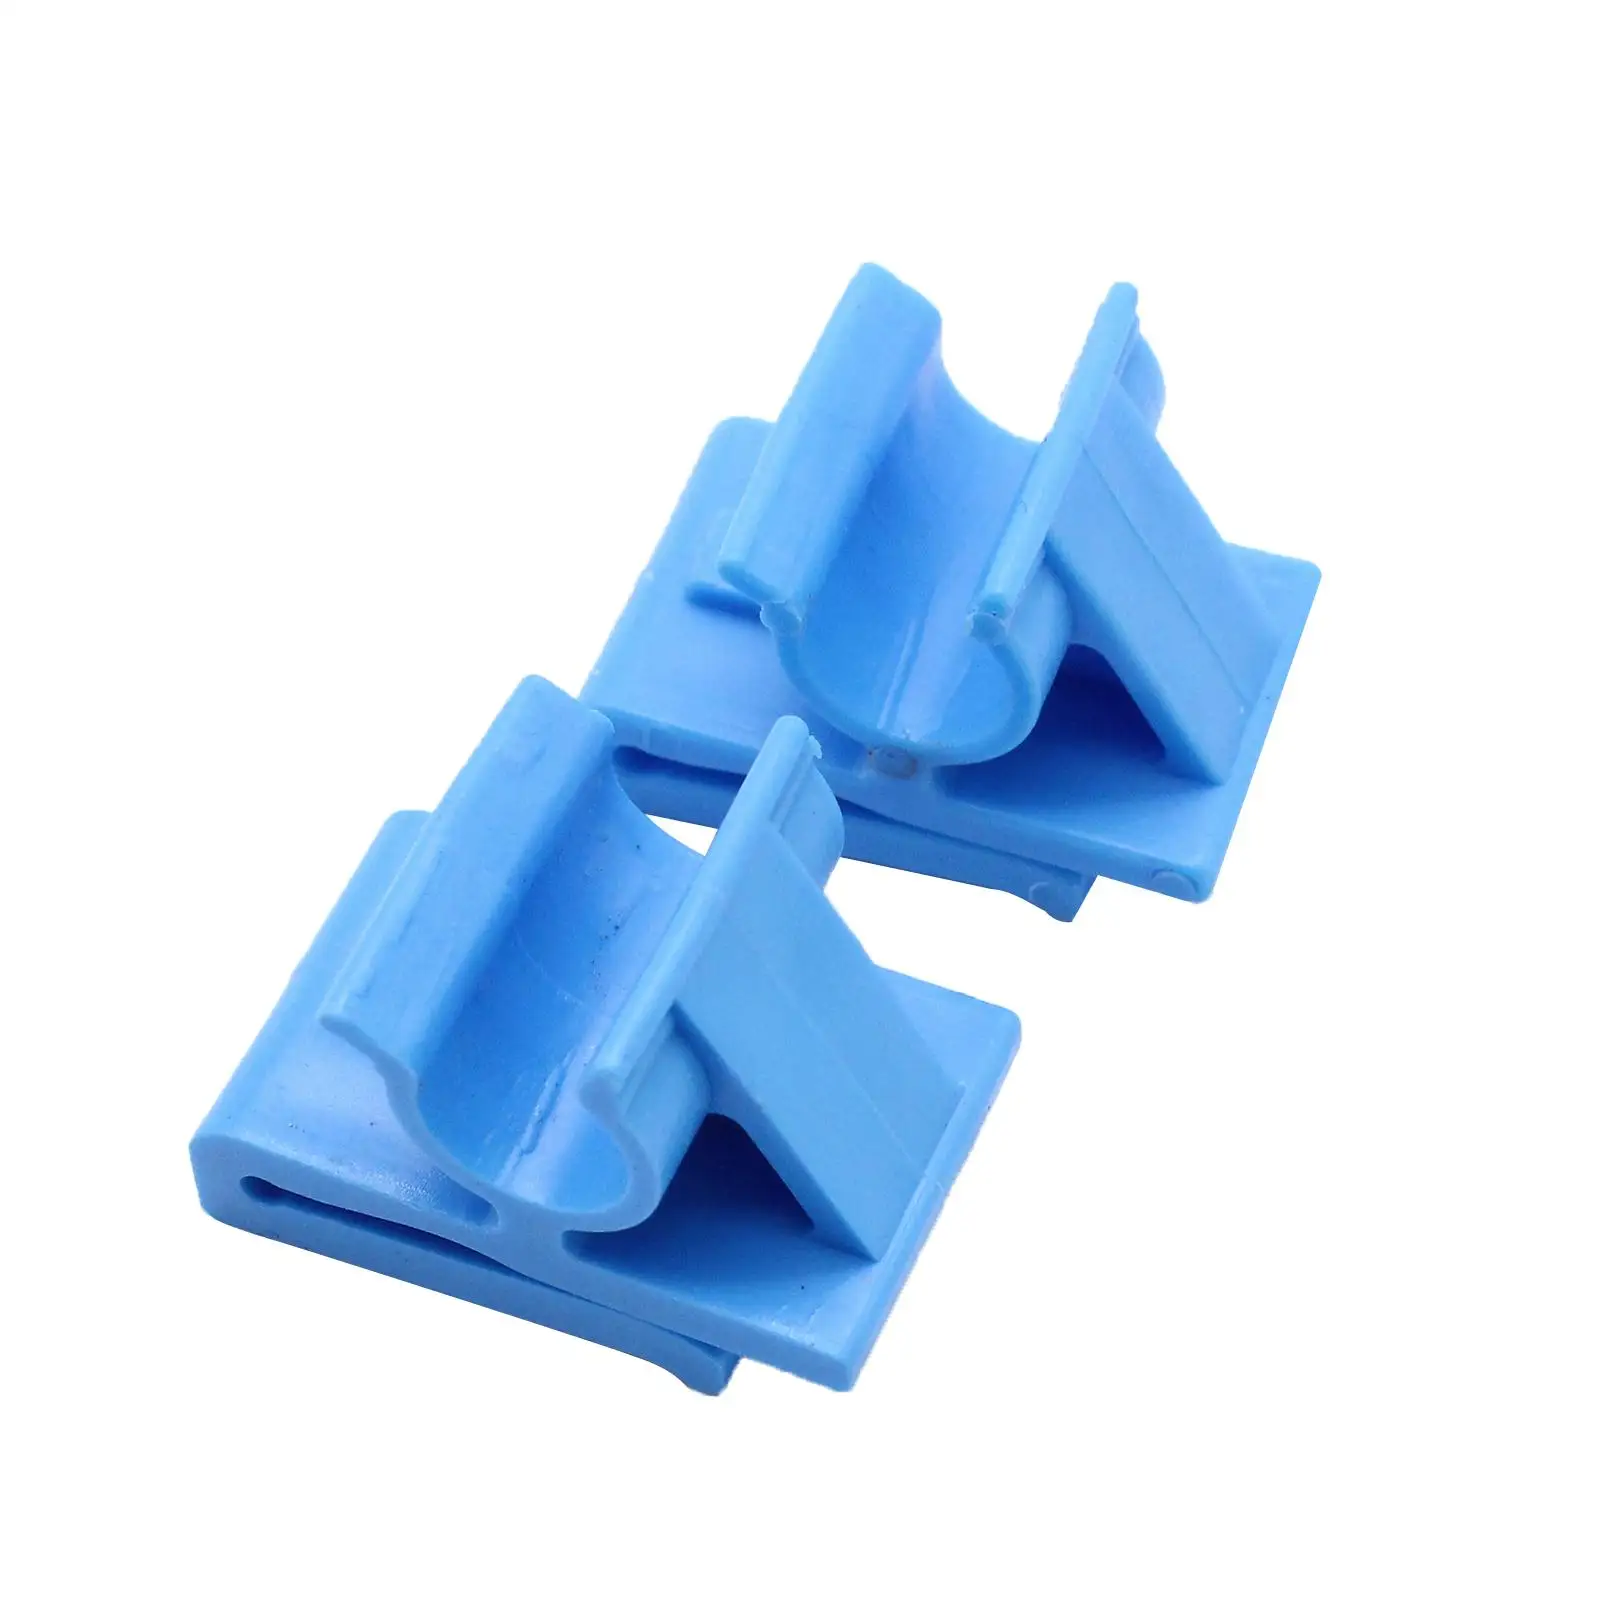 2x Blue Lower Glove Box Clips Fix Parts Bump Stop Set Fit for Holden Vehicle